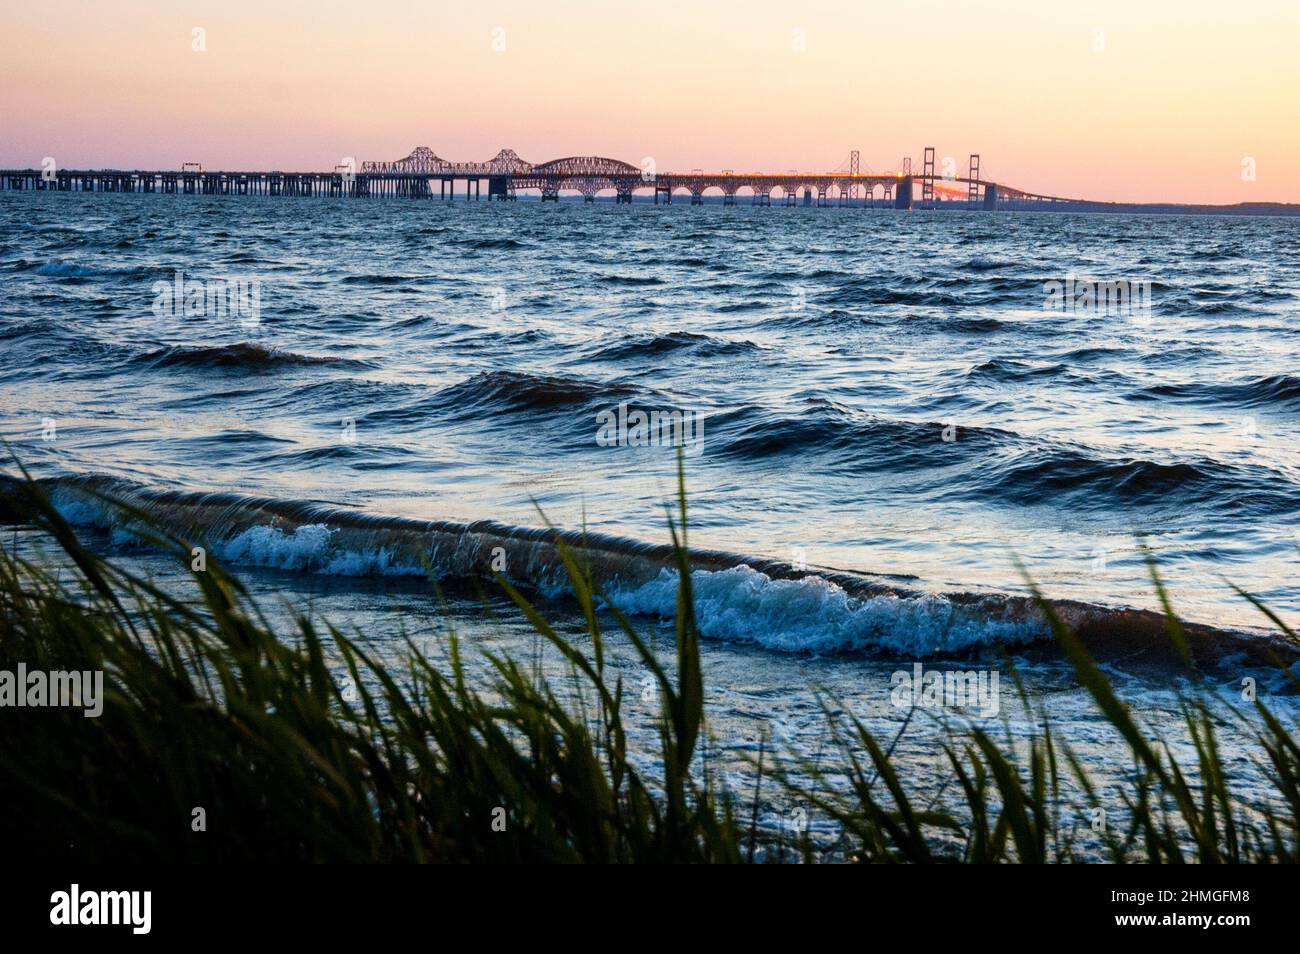 Eastern shoreline of the Chesapeake Bay at Terrapin Nature Park and sun setting over the parallel Bay Bridges in Maryland. Stock Photo